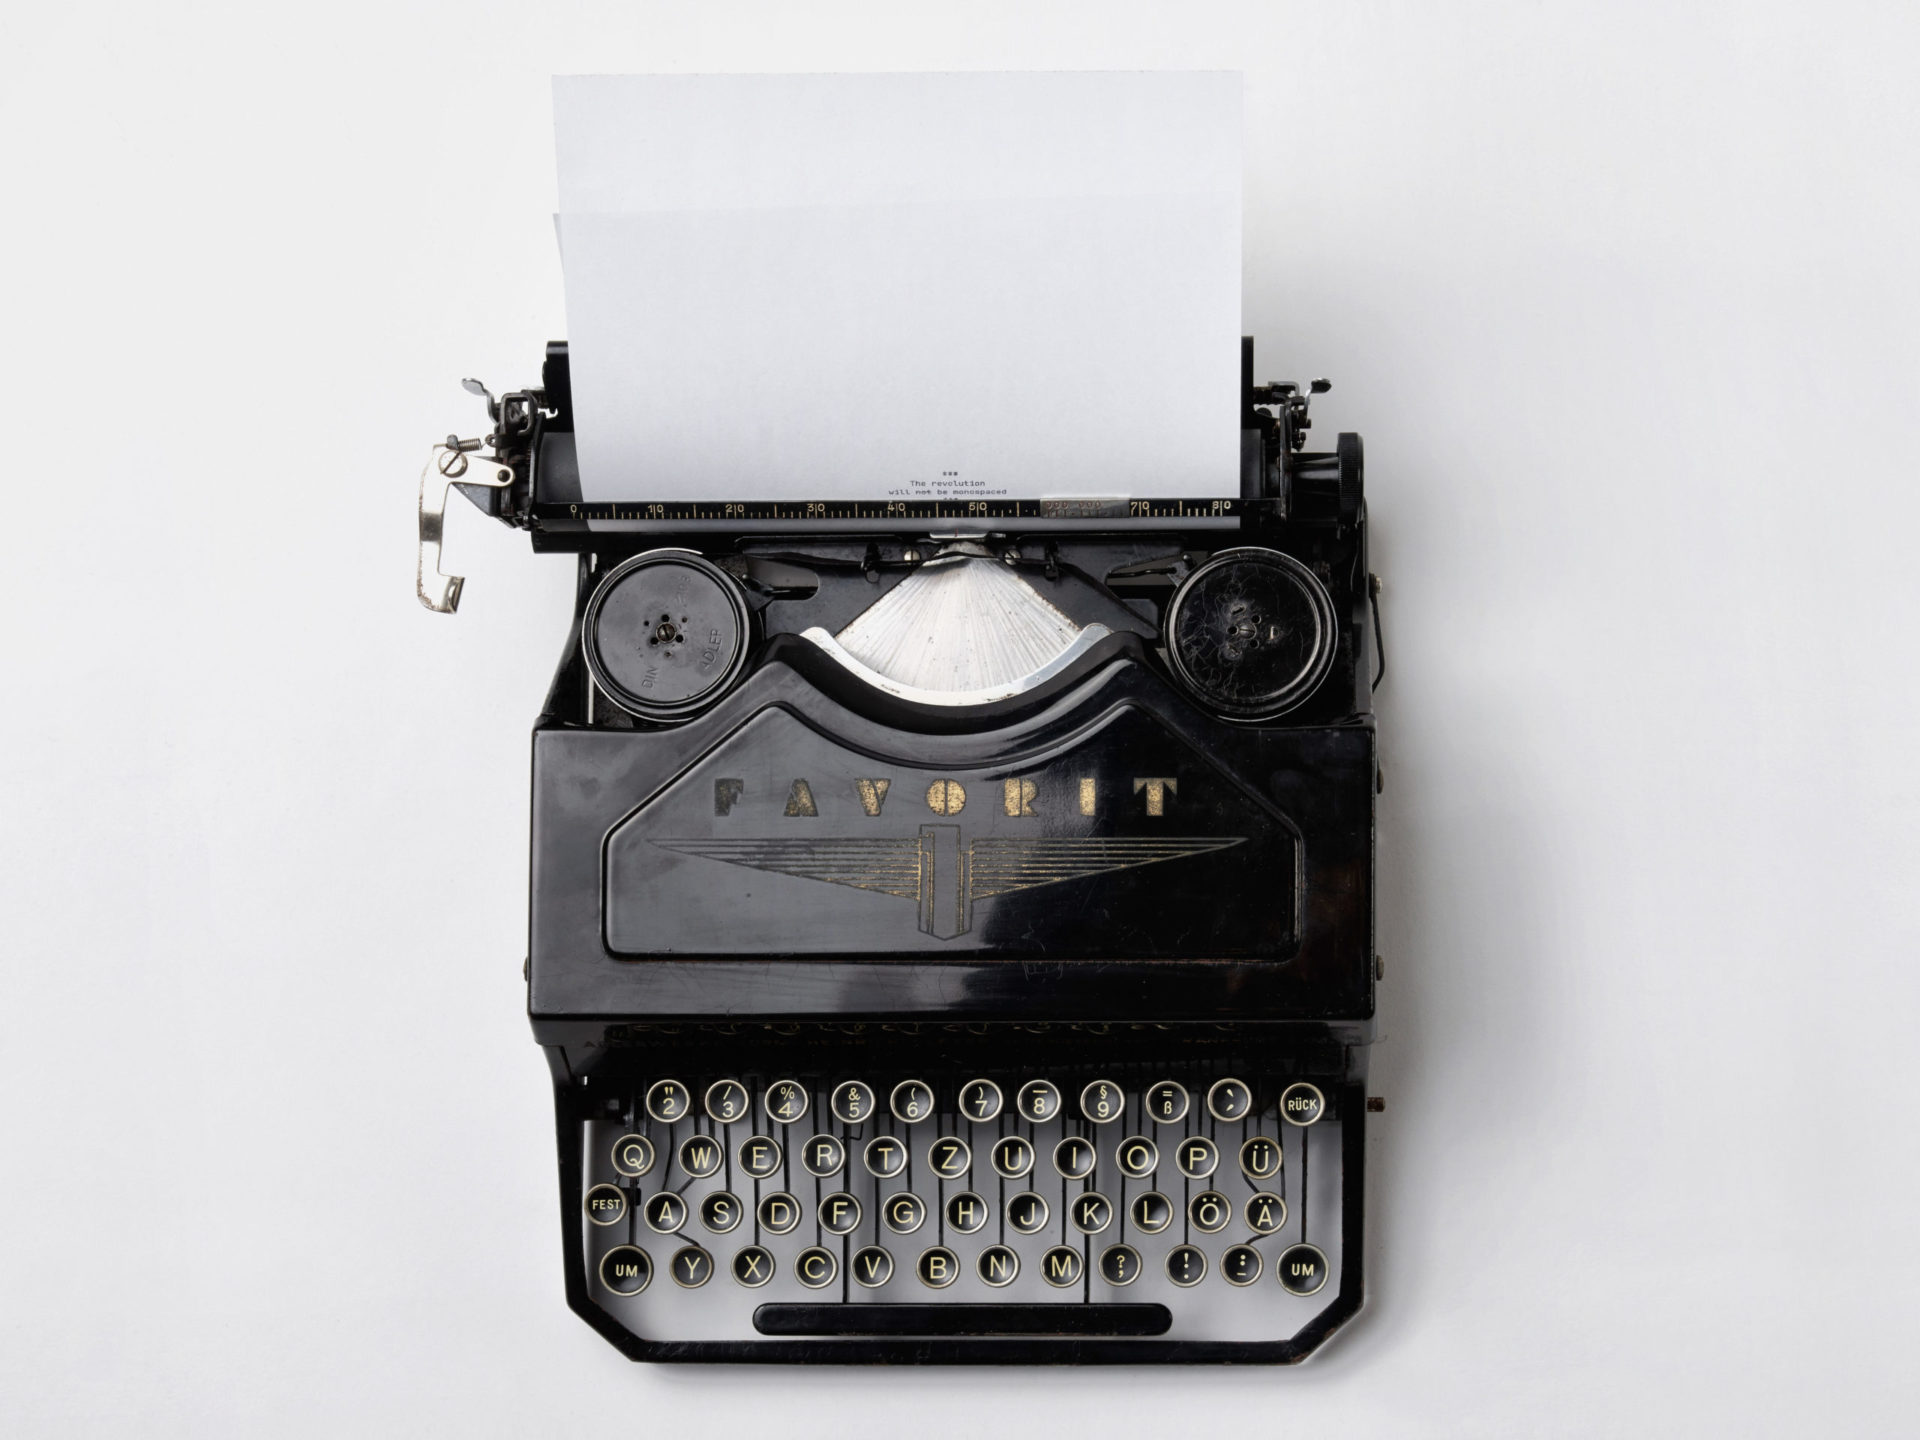 A black typewriter sitting on a white background with paper in it